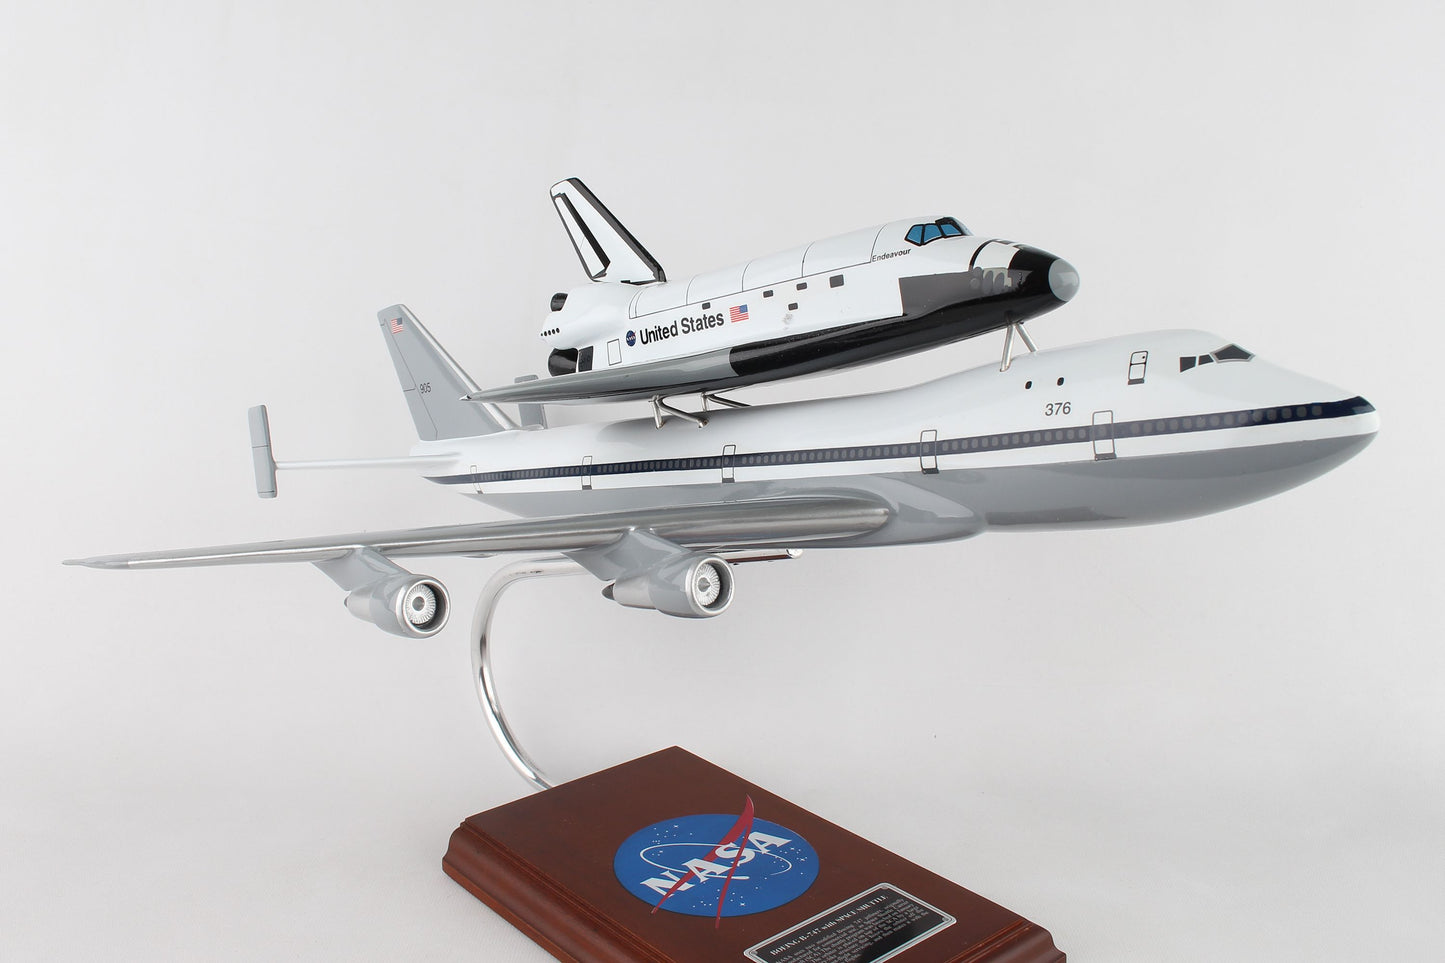 ALDO Creative Arts Collectibles Scale Model NASA Airplane Boeing 747 With Space Orbiter Shuttle Endeavour Wood Model Aircraft